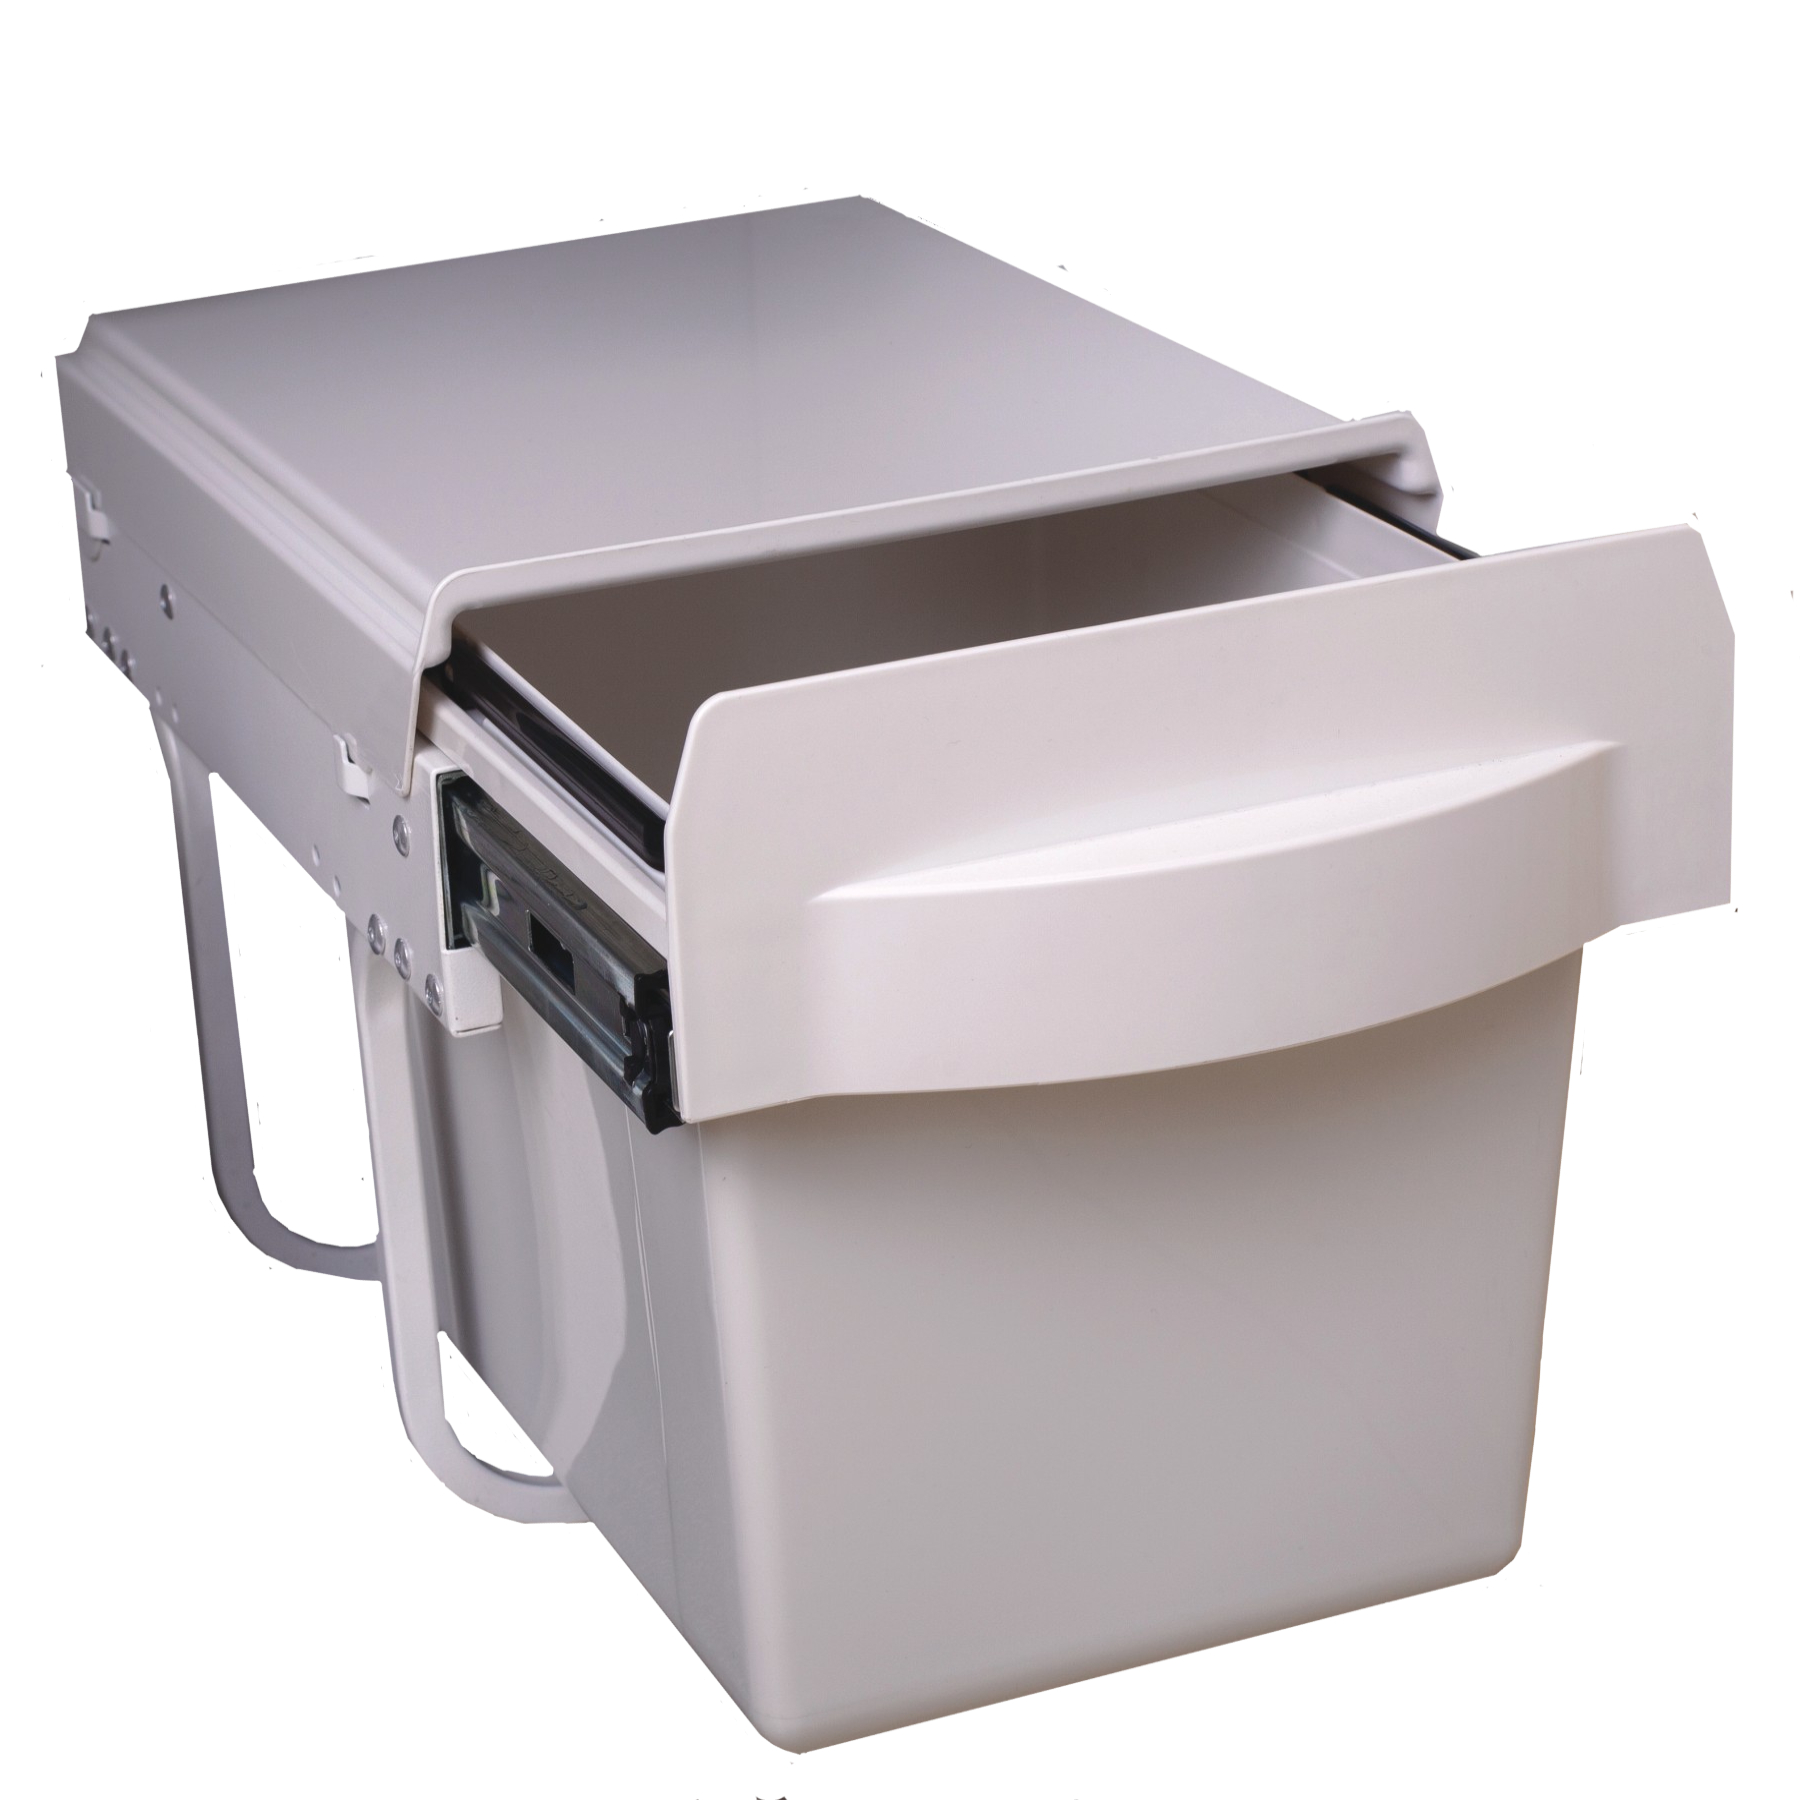 Single slim bin SOFT CLOSE- pull-out 1 x 15 ltr with handle 300h x 262w x 360d